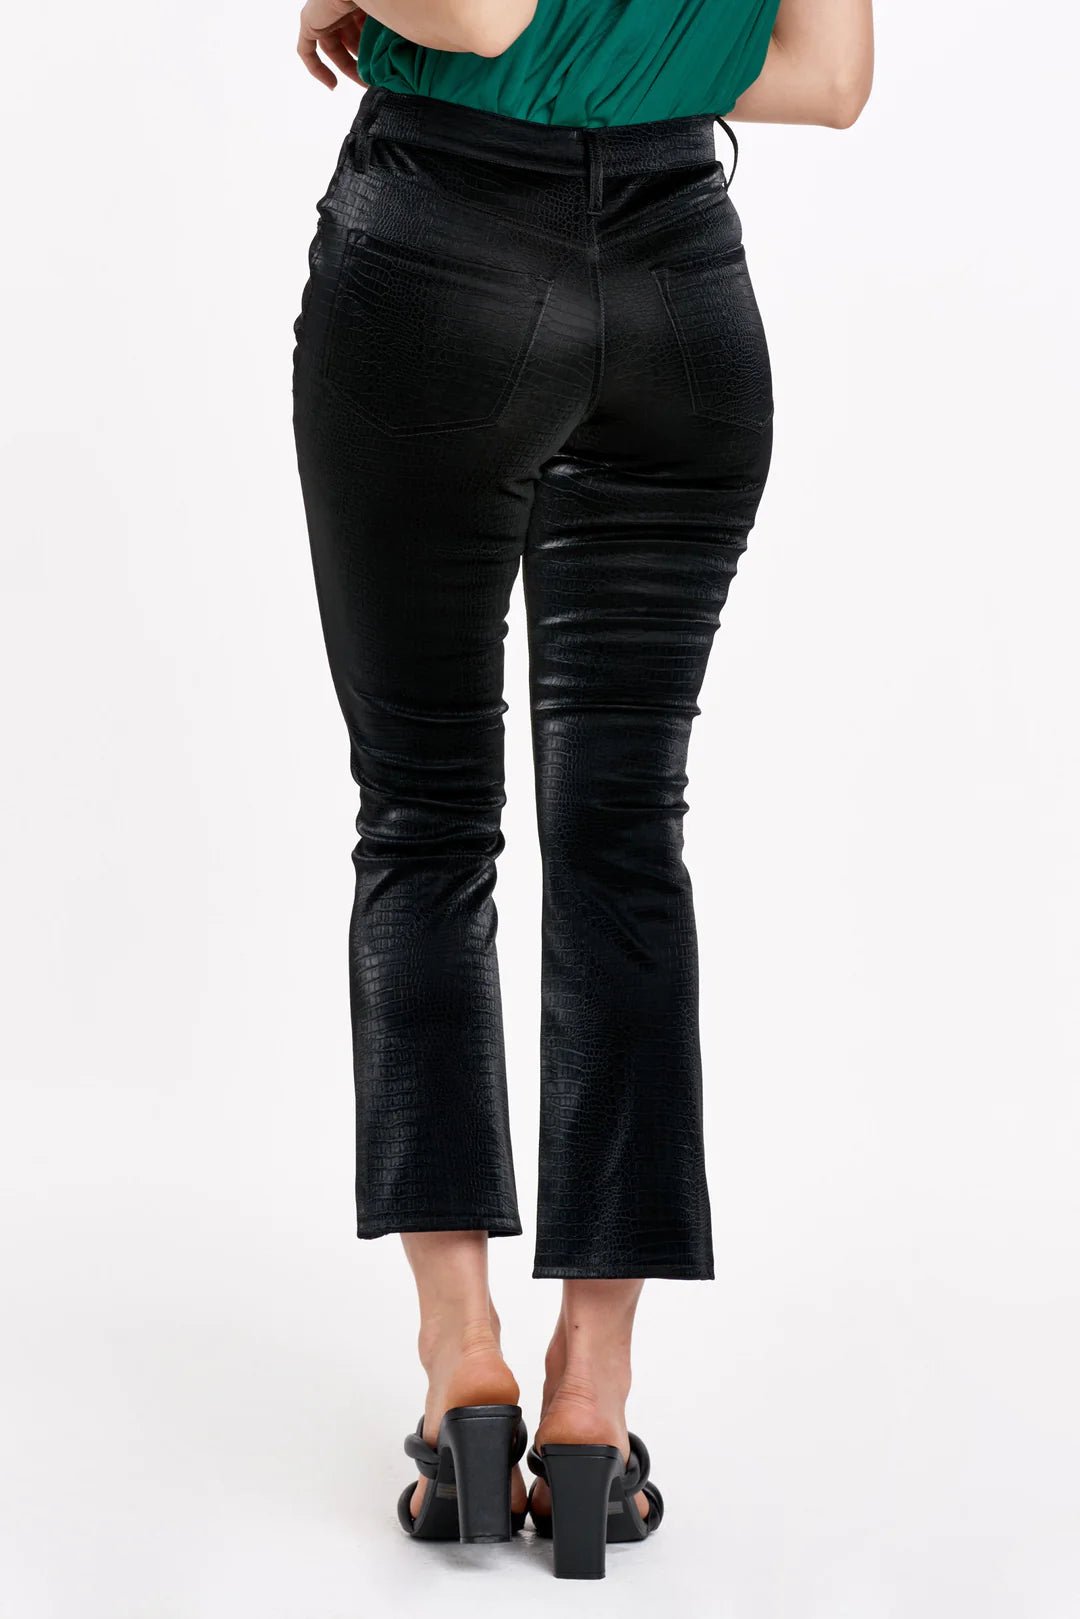 JEANNE SUPER HIGH RISE CROPPED FLARE PANTS BLACK EMBOSSED